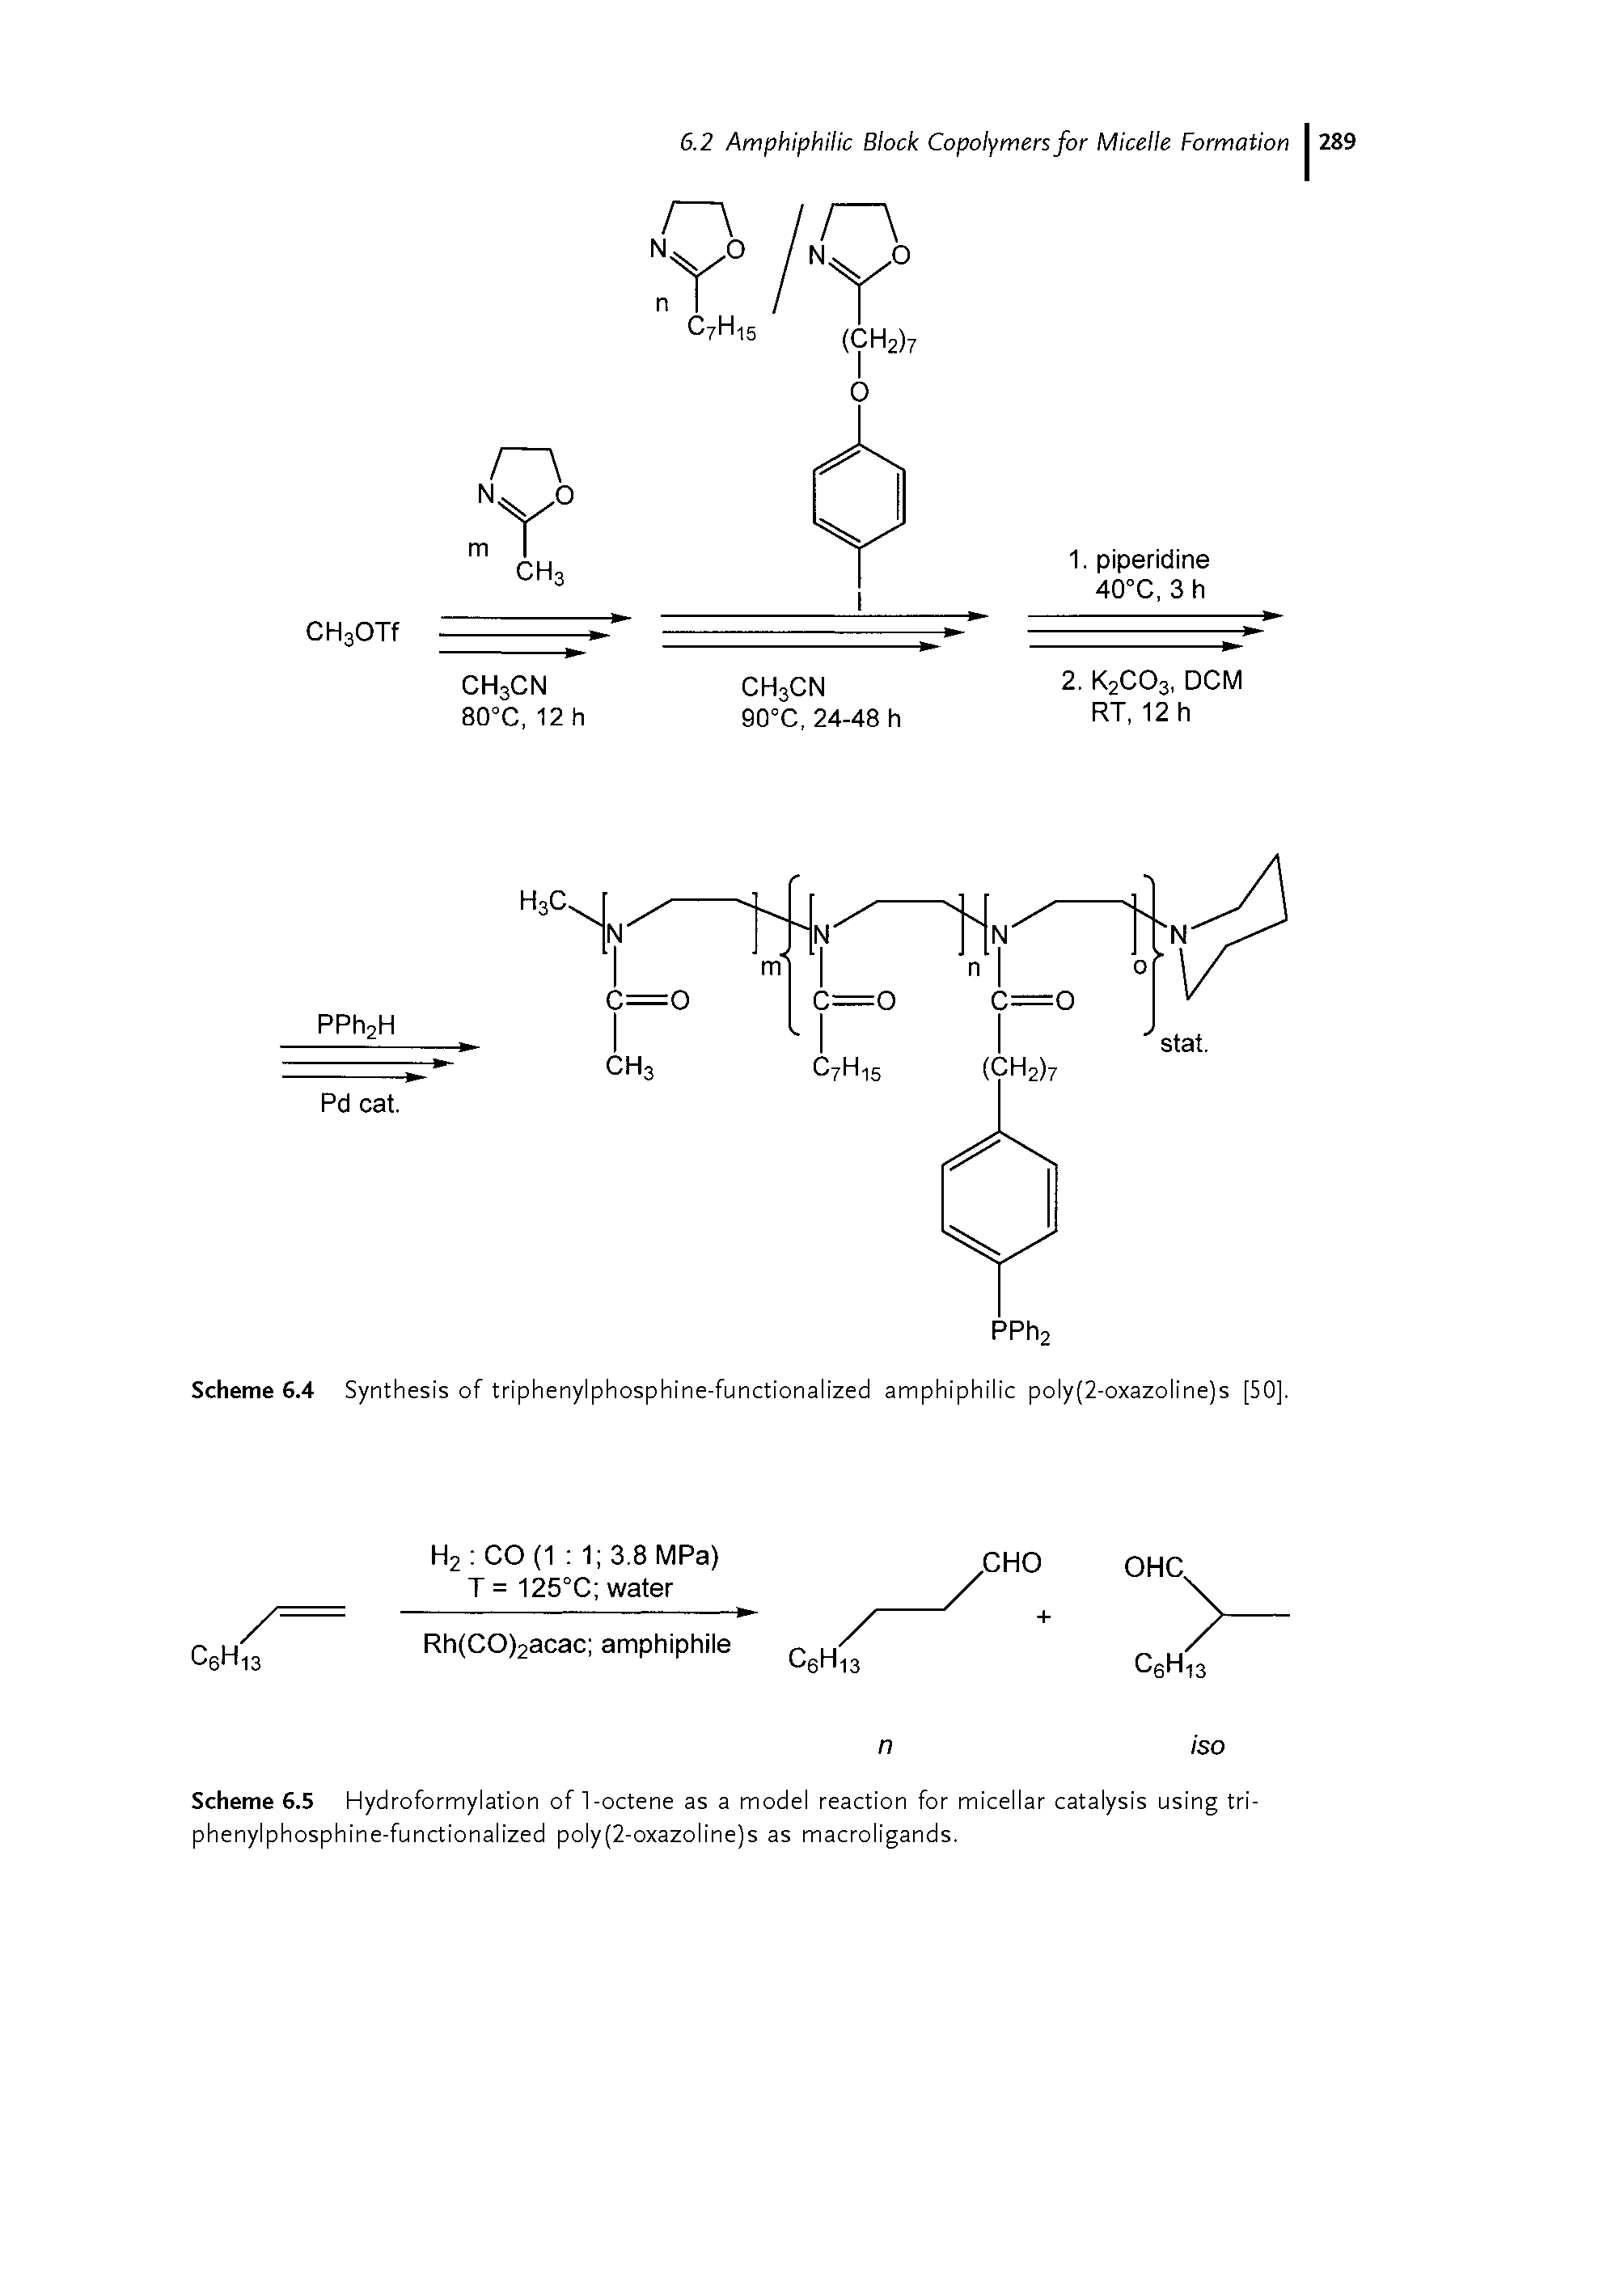 Scheme 6.5 Hydroformylation of 1 -octene as a model reaction for micellar catalysis using tri-phenylphosphine-functionalized poly(2-oxazoline)s as macroligands.